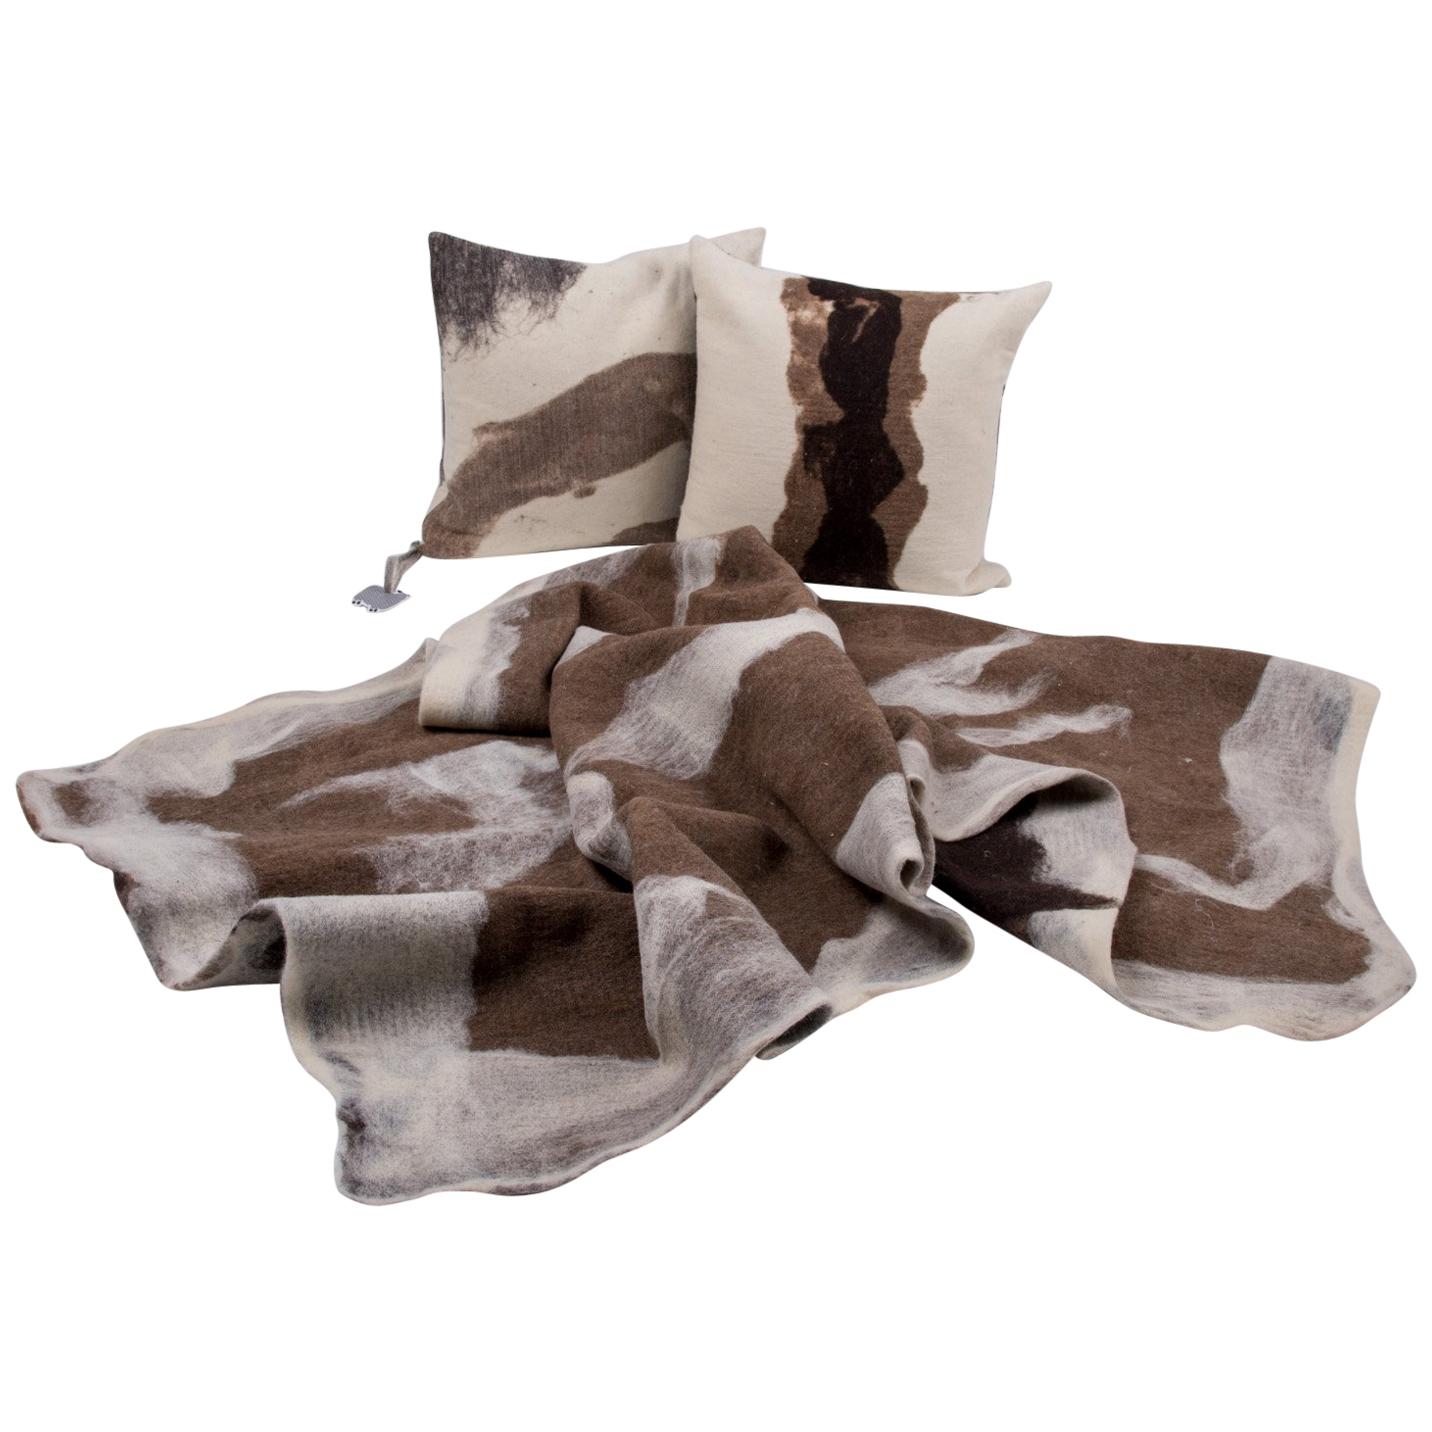 Hand-Milled Artisan Wool Pillows and Rustic Throw, Tahoe Collection For Sale